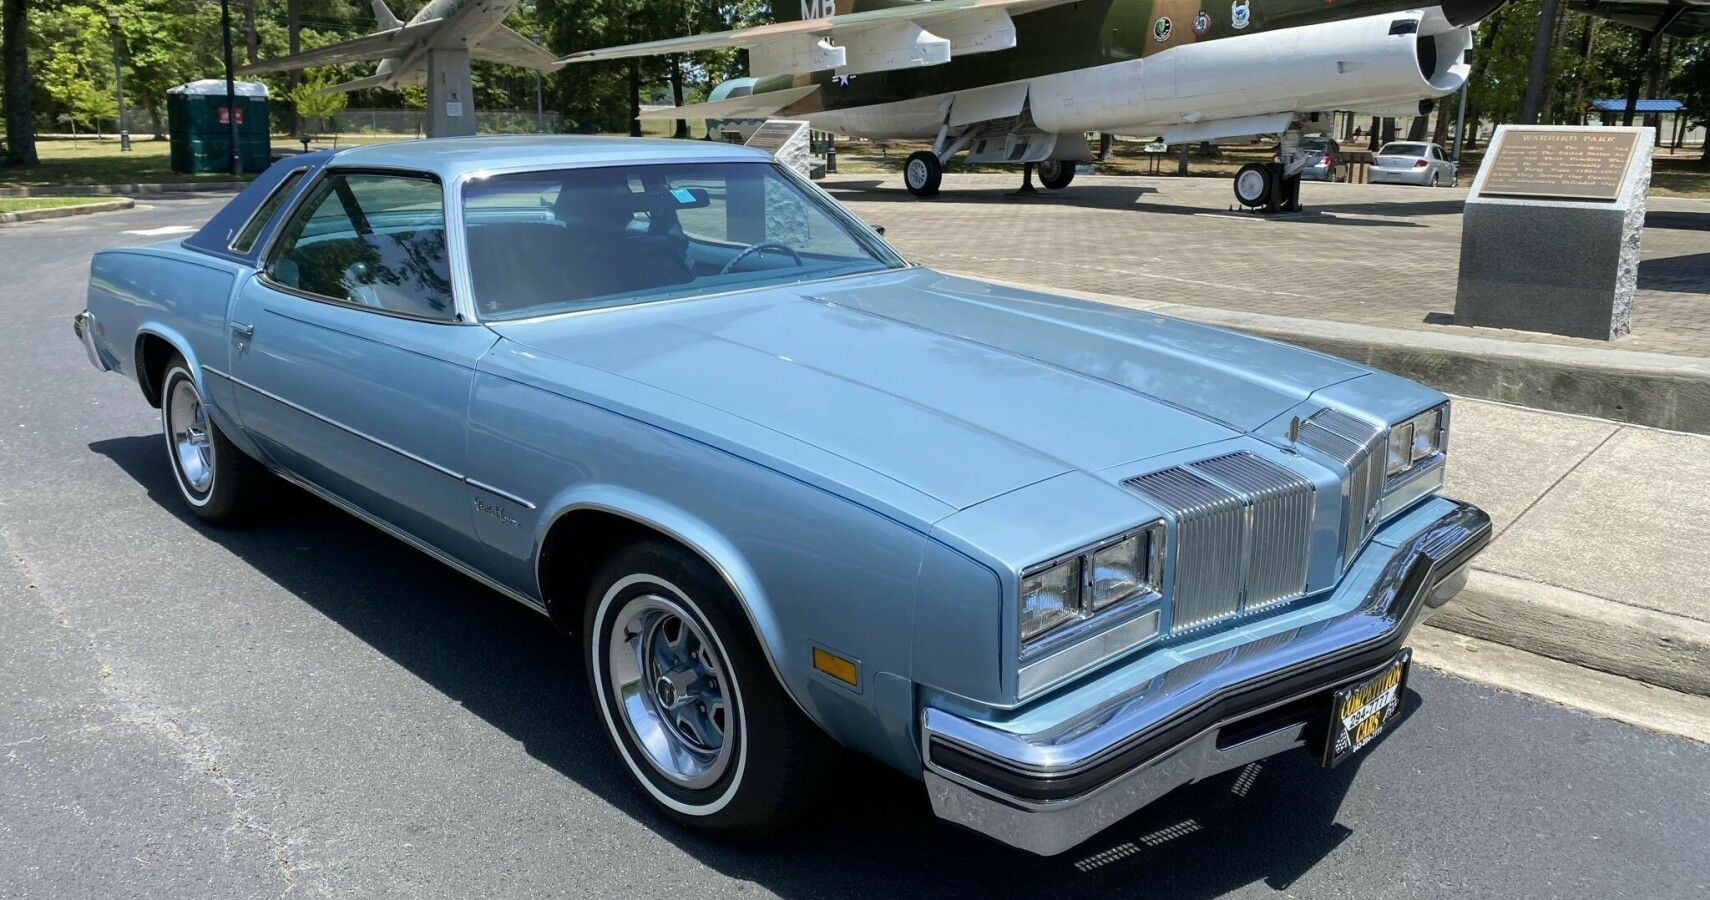 10 Things We Love About The 1976 Oldsmobile Cutlass Supreme | Porn Sex ...